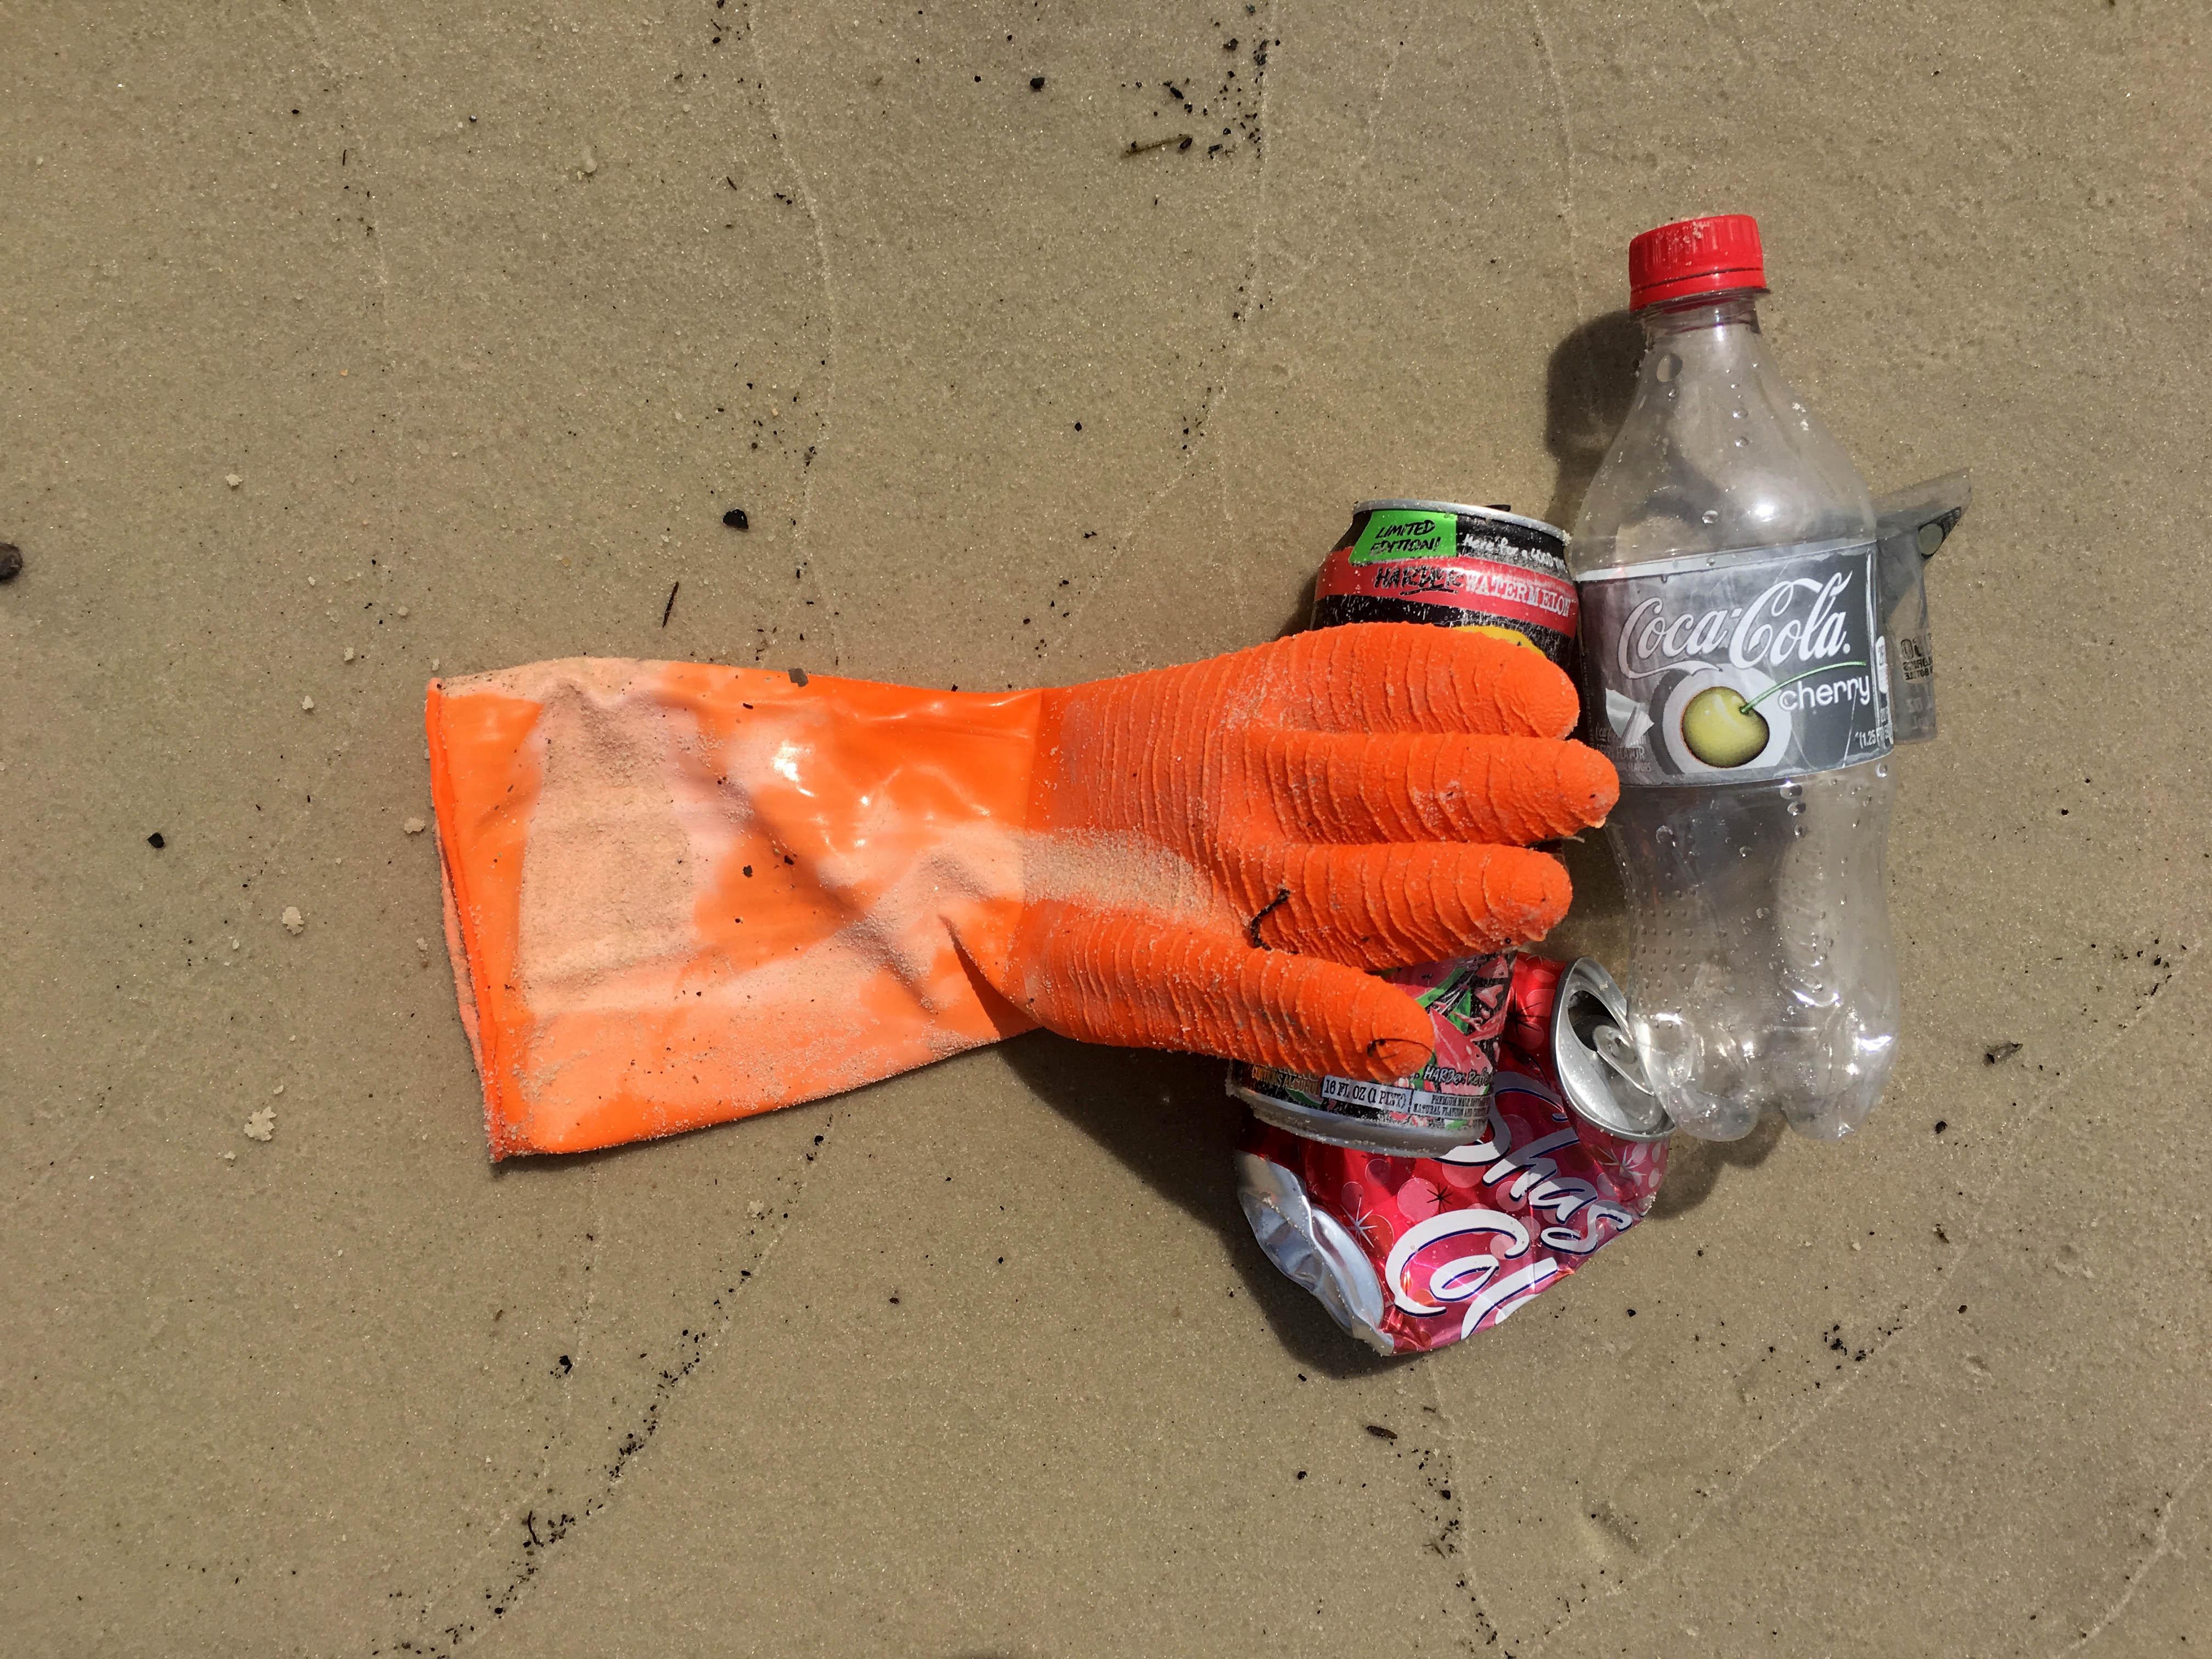 Small pile containing a rubber glove, an empty plastic bottle and two aluminum cans on wet sand.